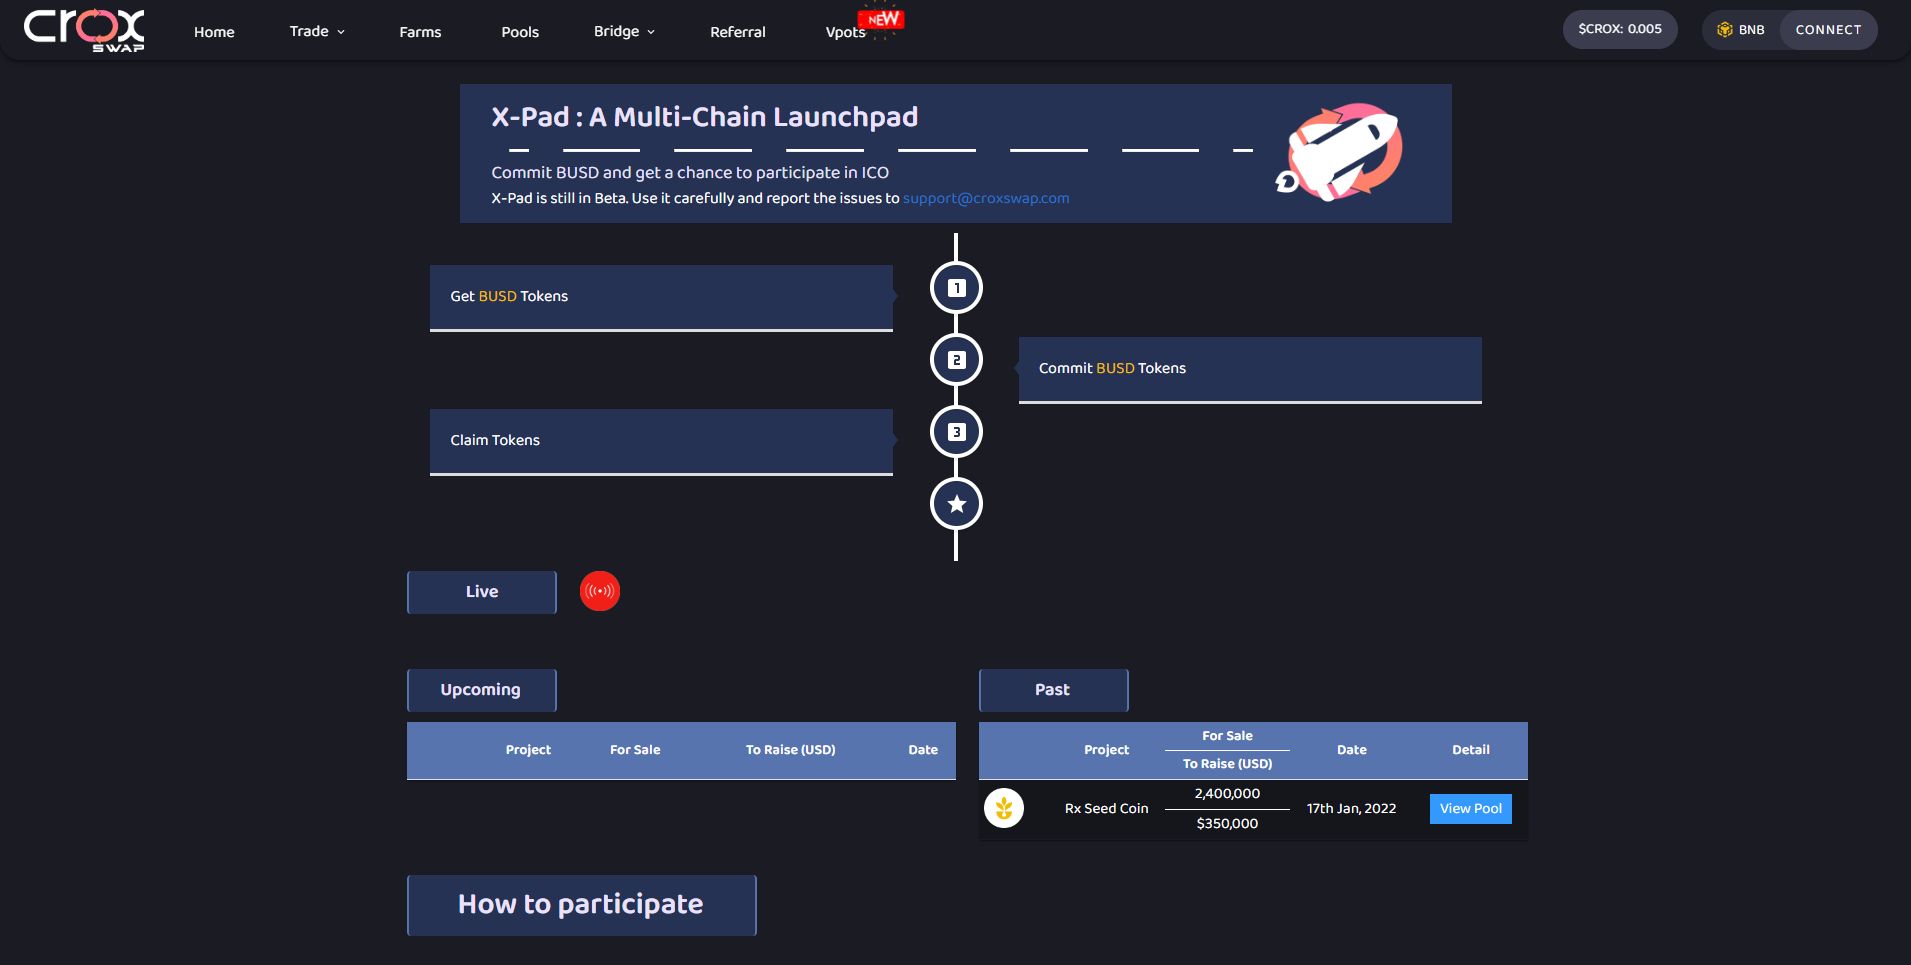 cro, Ln LU Farms fe LL LE] .- fe tT EL LUT ad
re

X-Pad : A Multi-Chain Launchpad

Commit BUSD and get a chance to participate in ICO
X-Pad 1s still in Beta. Use & carefully and report the issues to

Get BUSD Tokens O
© Commit BUSD Tokens.
ro 0

| = 1 @®

2.400000
sew Com Se
REiLre

How to participate |